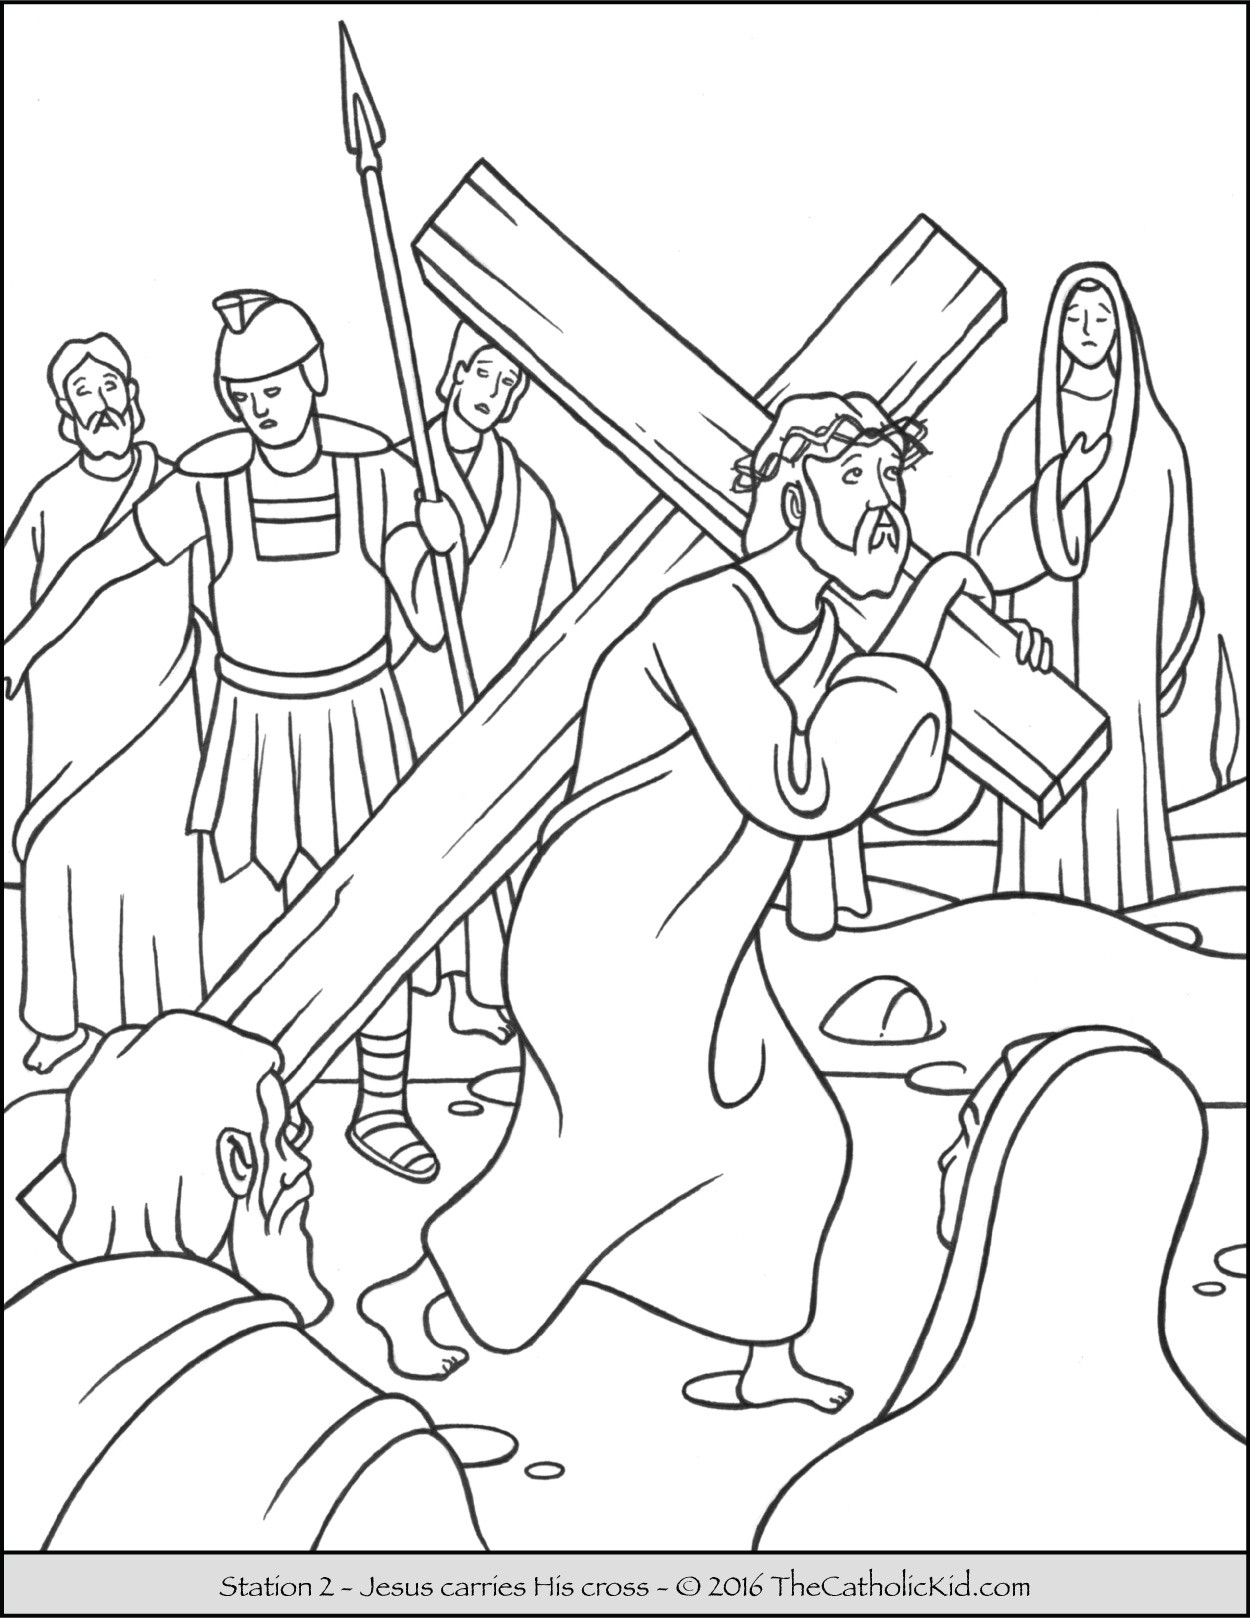 Coloring Pages Jesus
 Stations of the Cross Coloring Pages The Catholic Kid